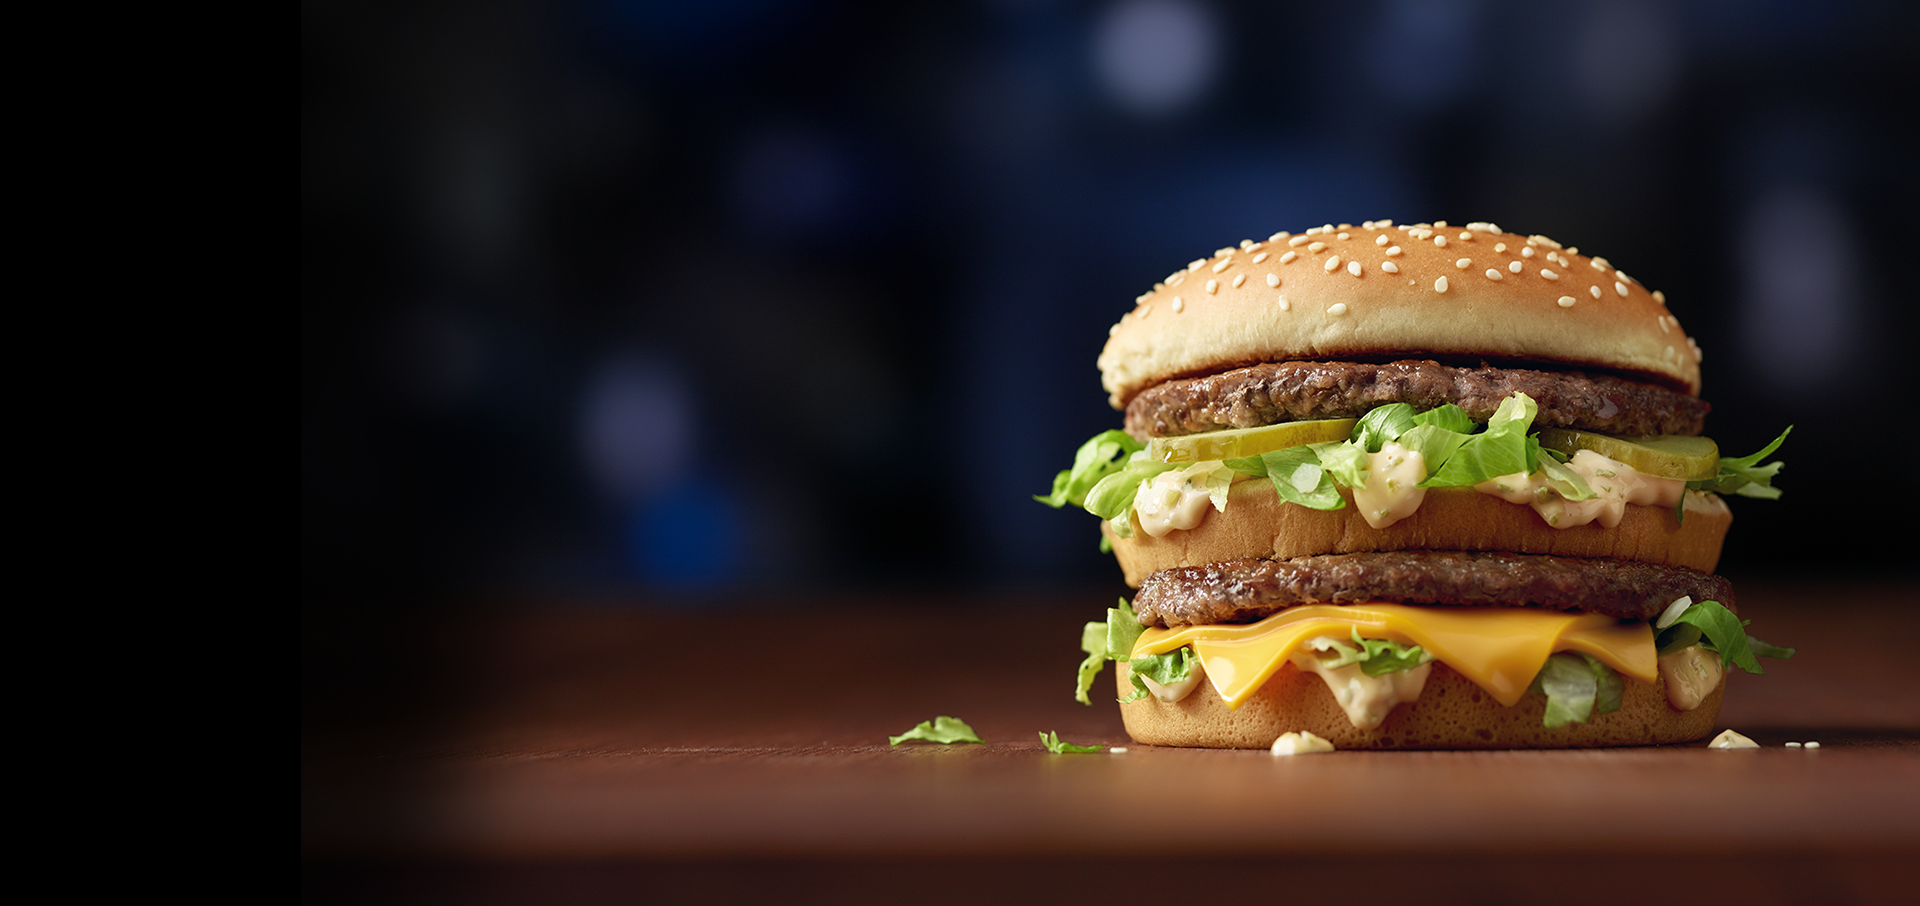 Mcdonalds Download The App And Get Big Mac For $1